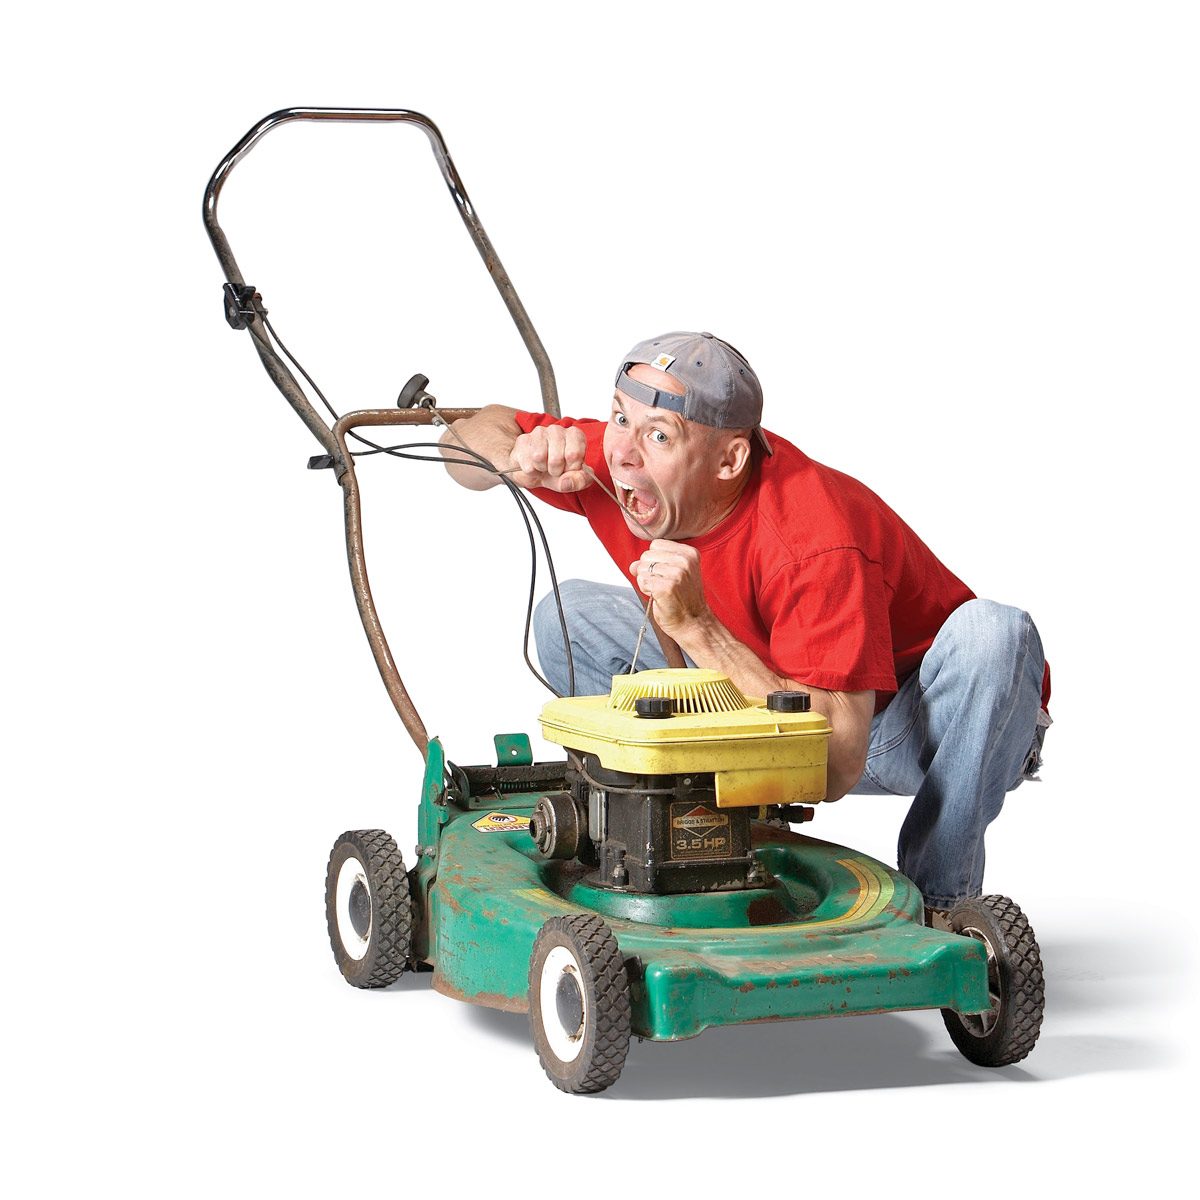 20 Things To Consider When Buying A Lawn Mower Family Handyman